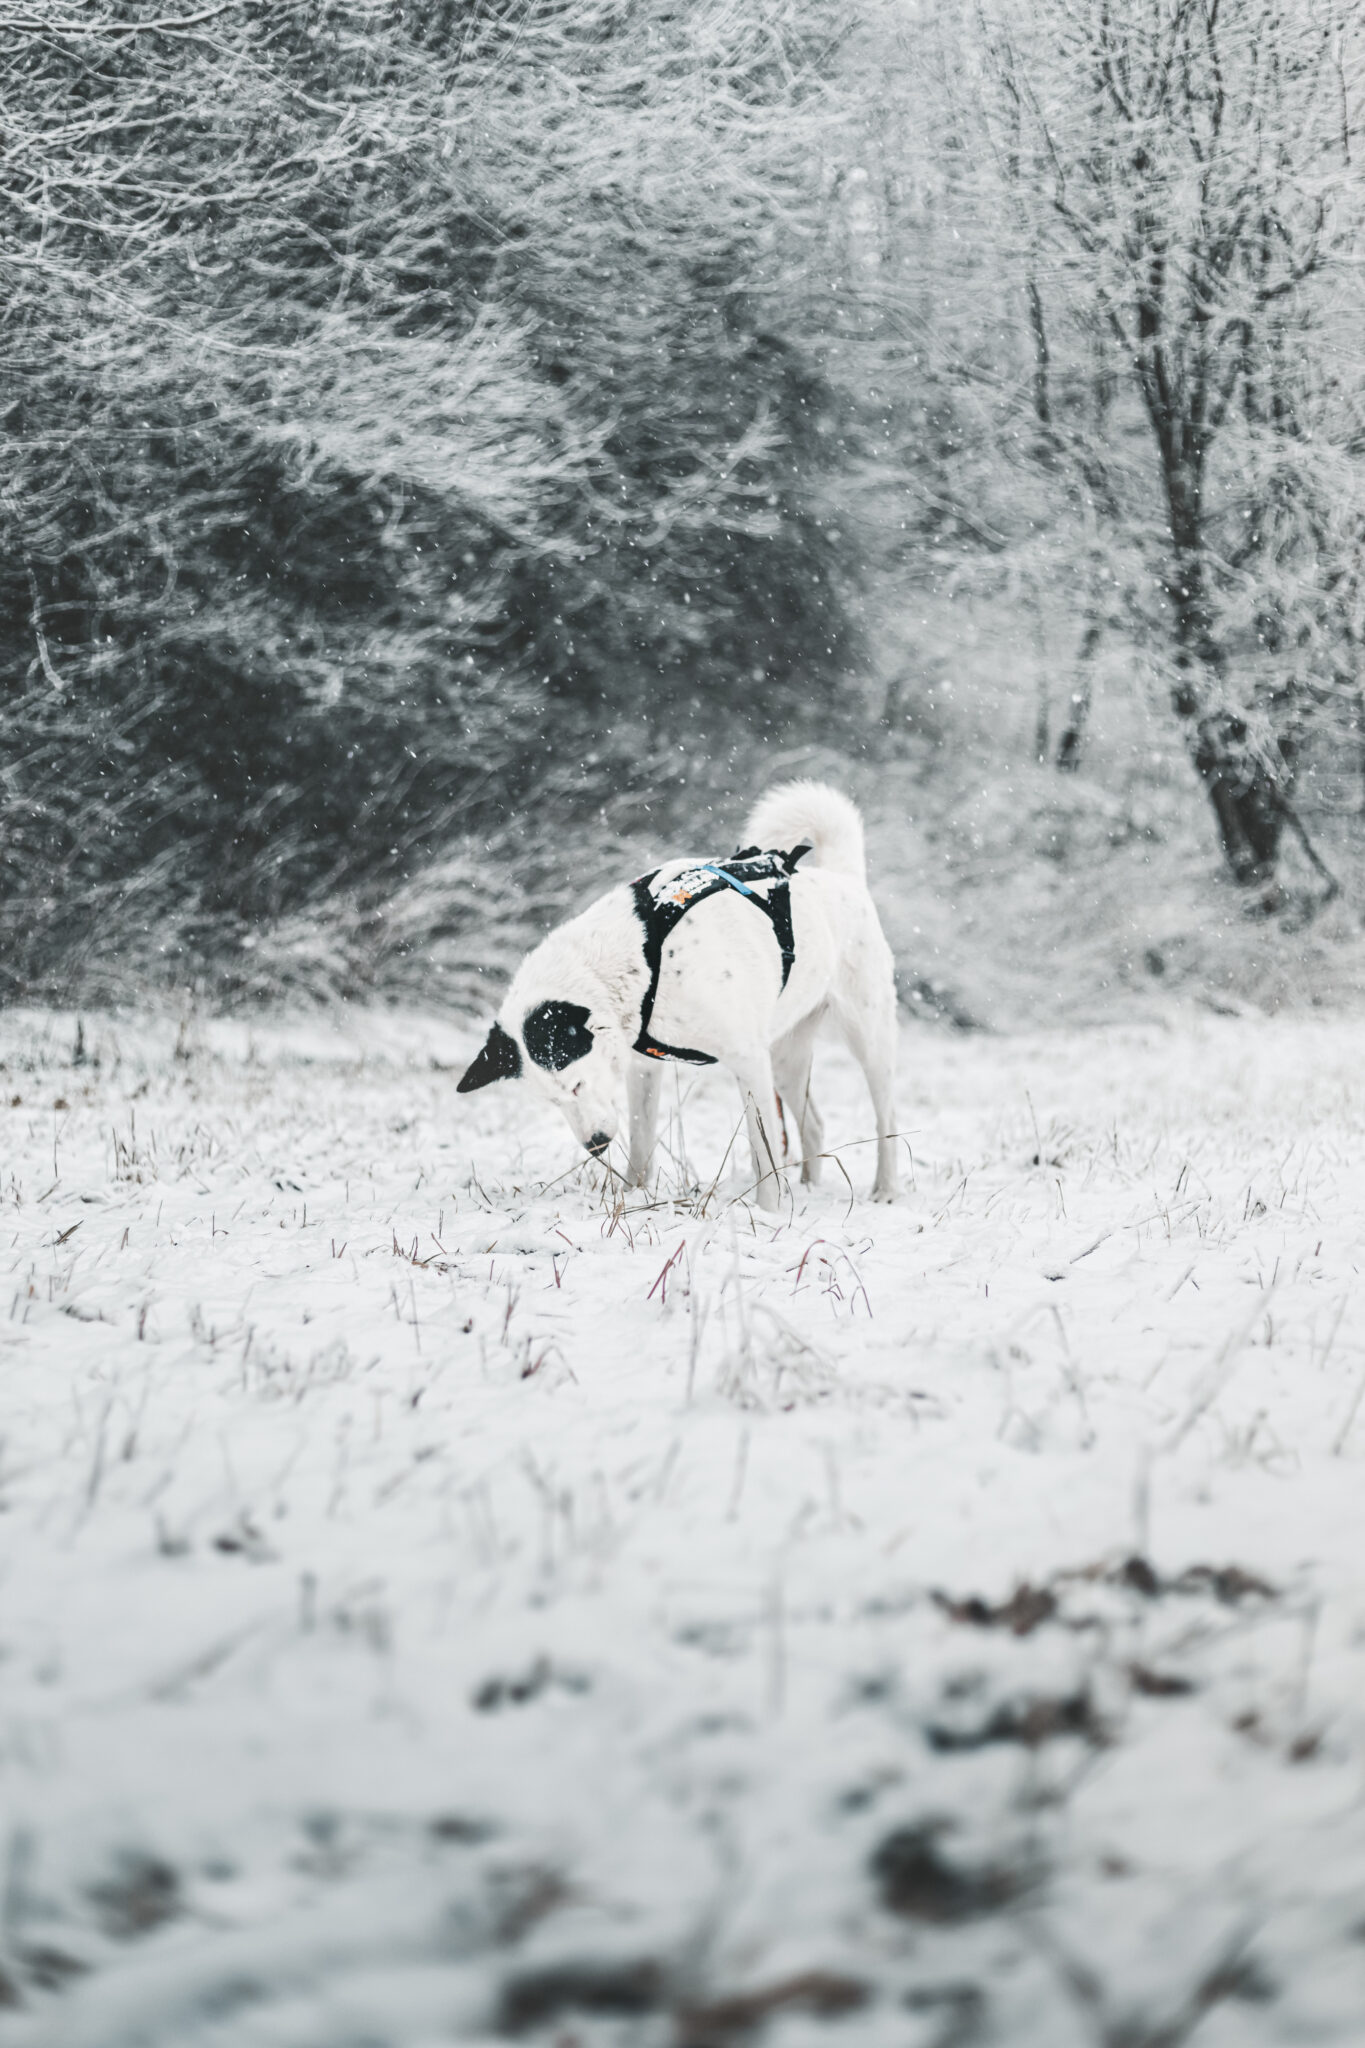 There is a dusting of snow on a yard and a dog is seen sniffing the ground. This article covers essentials to getting your yard ready for winter.